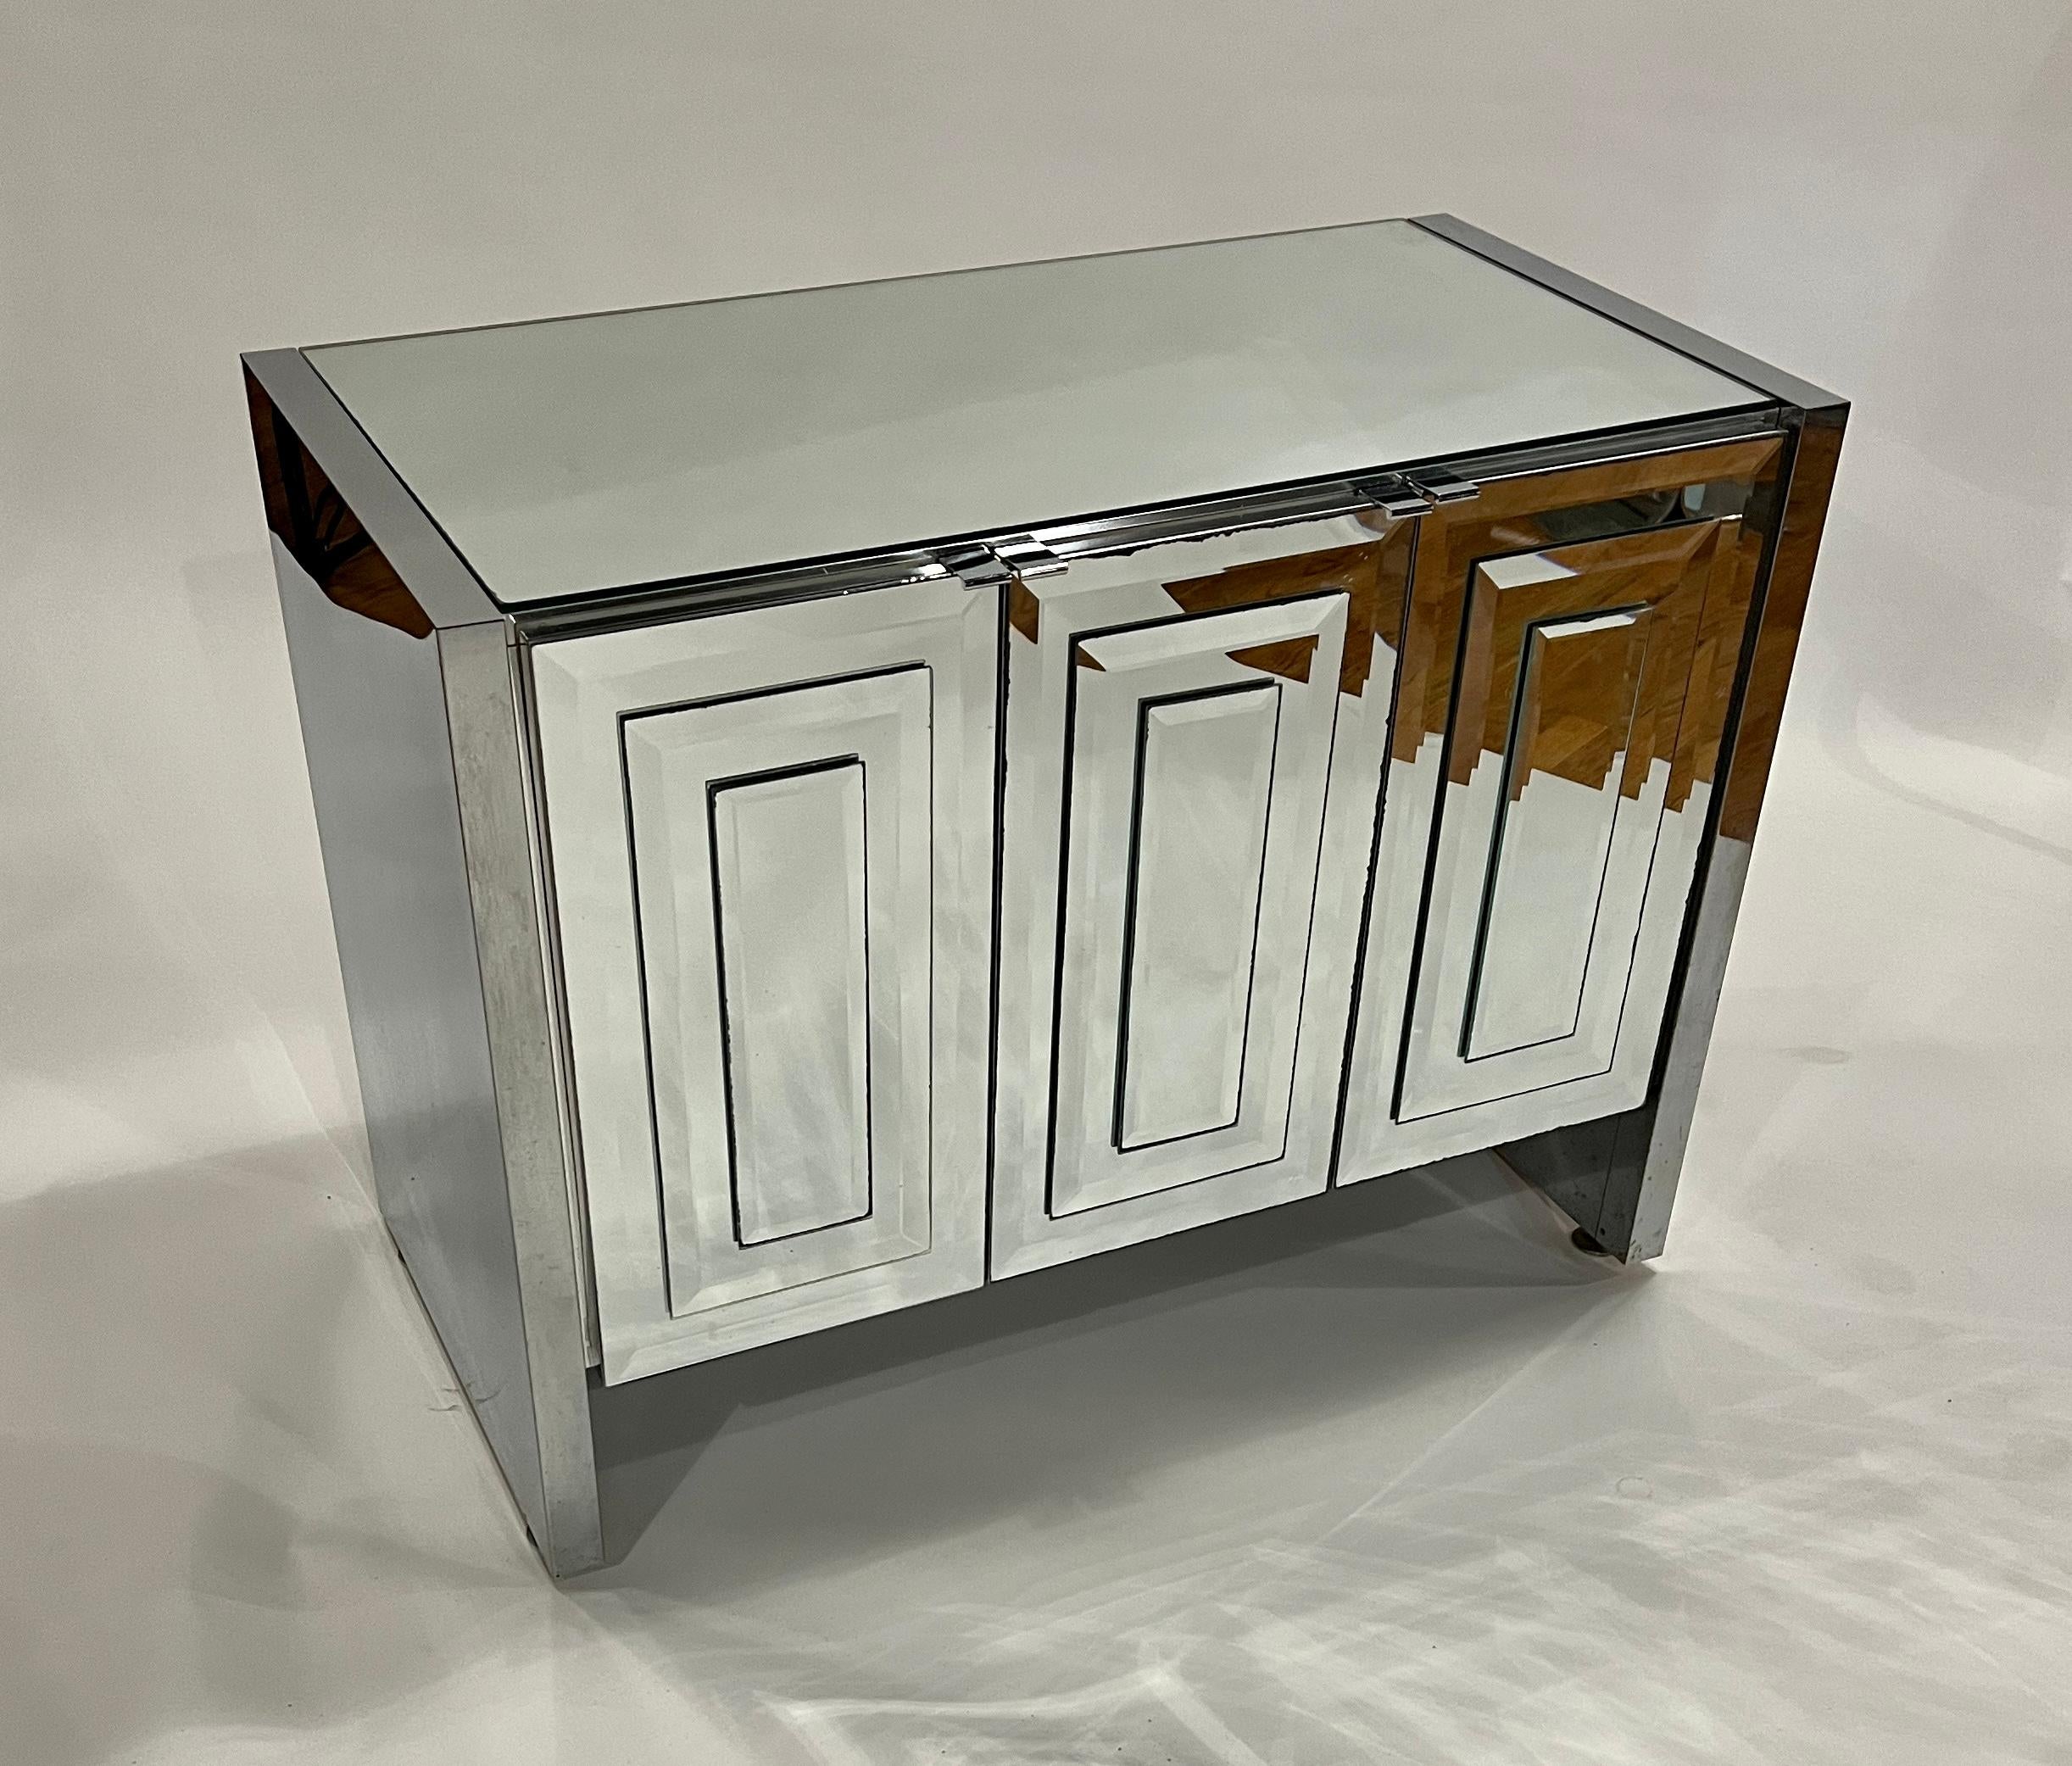 Pair of mirrored chest of drawers by Ello Furniture, Italy 1960s. Each cabinet is made of three beveled mirrored paneled hinged cabinet doors revealing three interior pullout drawers in lacquered white wood and chrome pulls. 
These large chests can